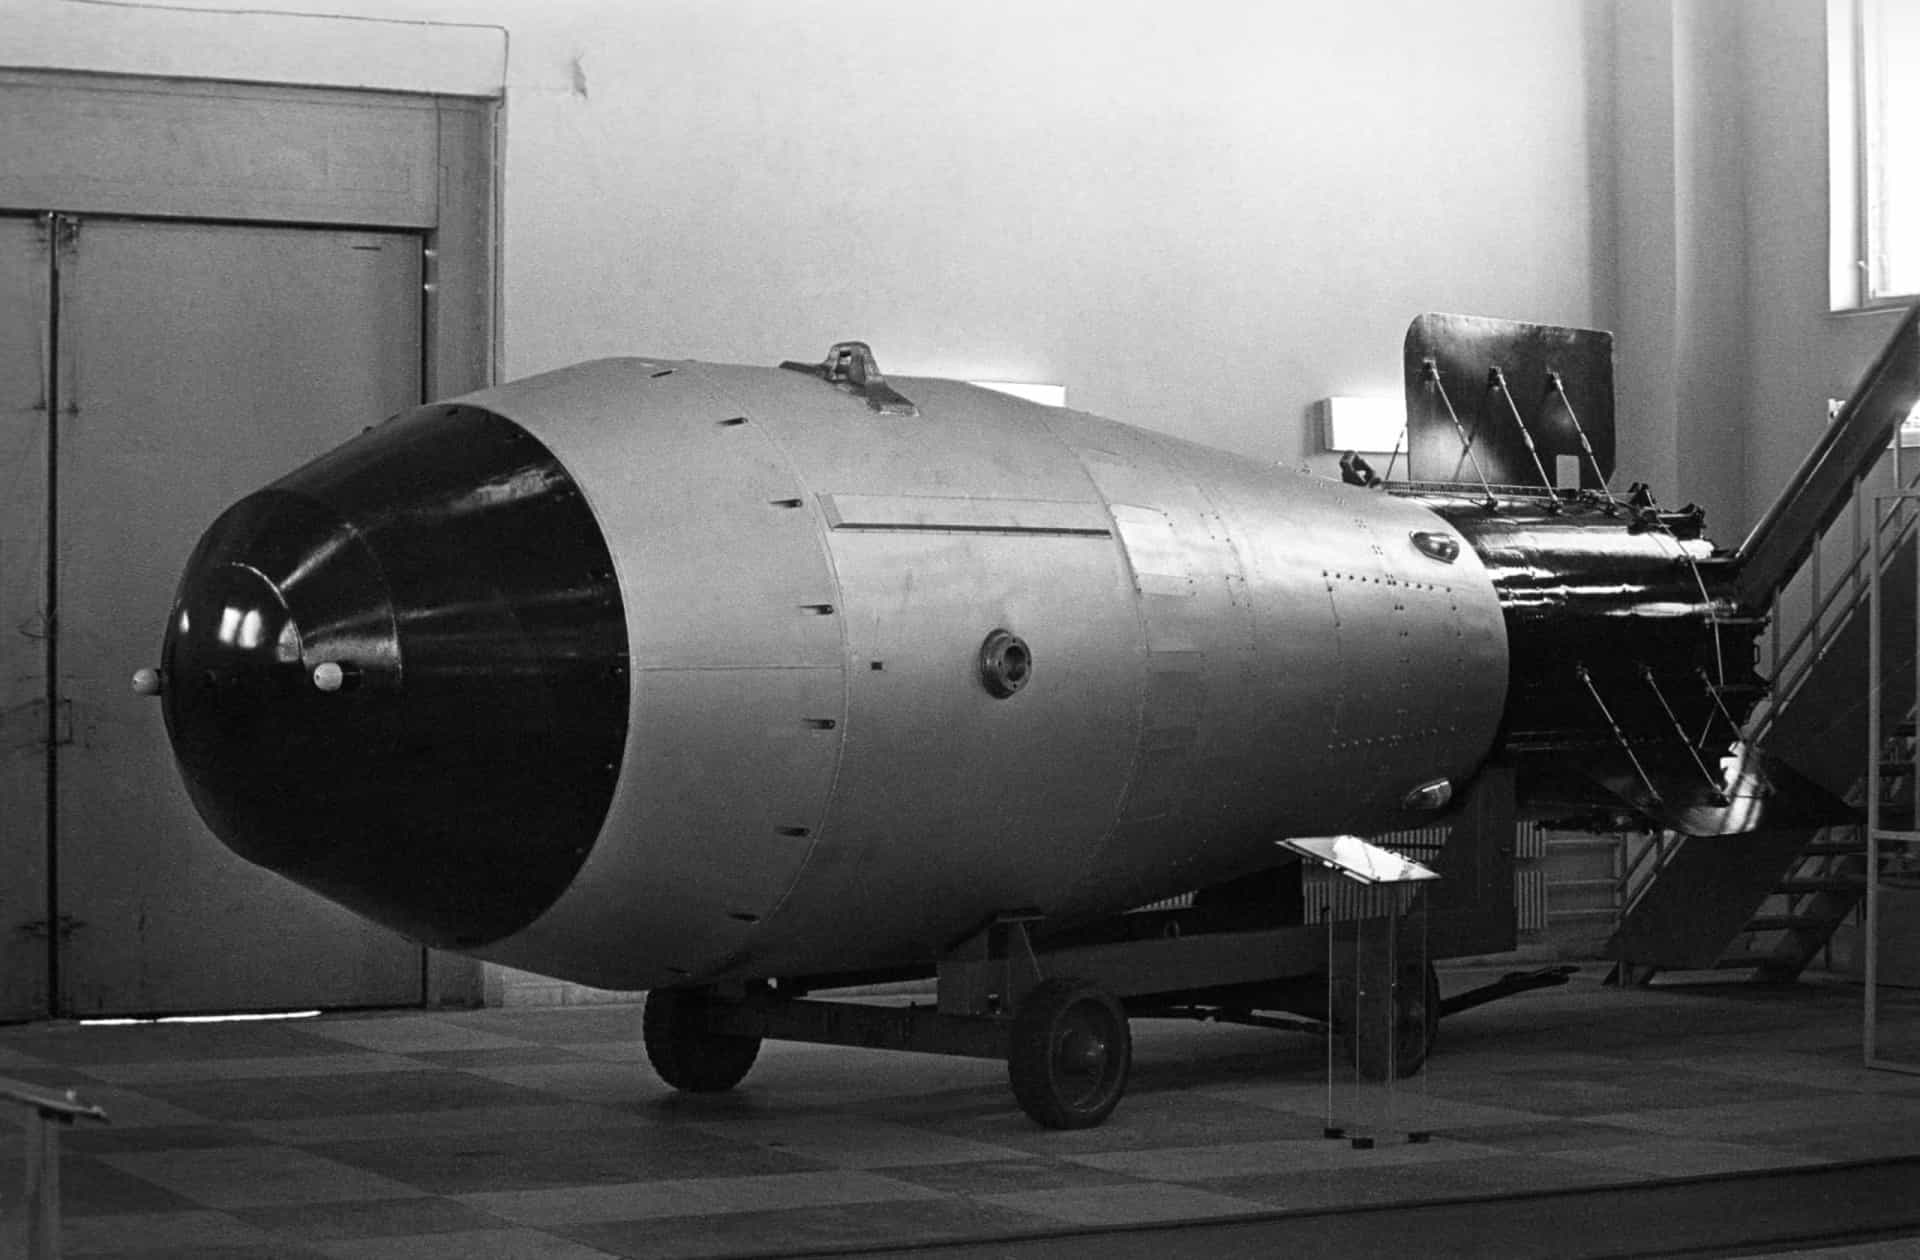 <p>The Cold War era witnessed the most powerful nuclear weapon ever created and tested—the Tsar Bomba. Developed by the Soviet Union, it was detonated on October 30, 1961 over the the remote Novaya Zemlya archipelago, releasing the equivalent of over 50 megatons of TNT, which was more than all the explosives used during the Second World War combined.</p>